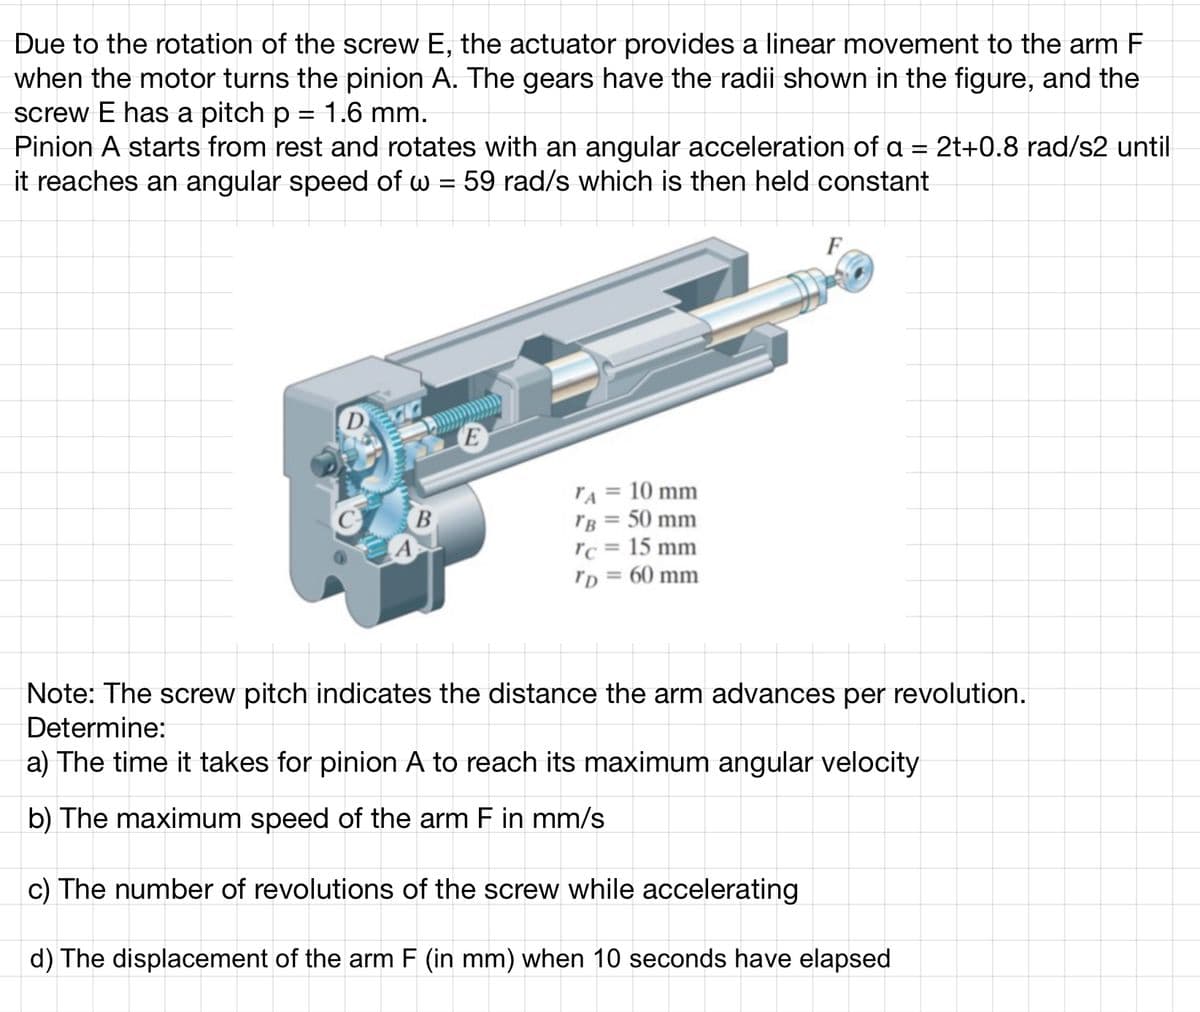 Due to the rotation of the screw E, the actuator provides a linear movement to the arm F
when the motor turns the pinion A. The gears have the radii shown in the figure, and the
screw E has a pitch p = 1.6 mm.
Pinion A starts from rest and rotates with an angular acceleration of a = 2t+0.8 rad/s2 until
it reaches an angular speed of w = 59 rad/s which is then held constant
Poradio men
D
B
TA
10 mm
TB = 50 mm
rc = 15 mm
TD = 60 mm
F
Note: The screw pitch indicates the distance the arm advances per revolution.
Determine:
a) The time it takes for pinion A to reach its maximum angular velocity
b) The maximum speed of the arm F in mm/s
c) The number of revolutions of the screw while accelerating
d) The displacement of the arm F (in mm) when 10 seconds have elapsed